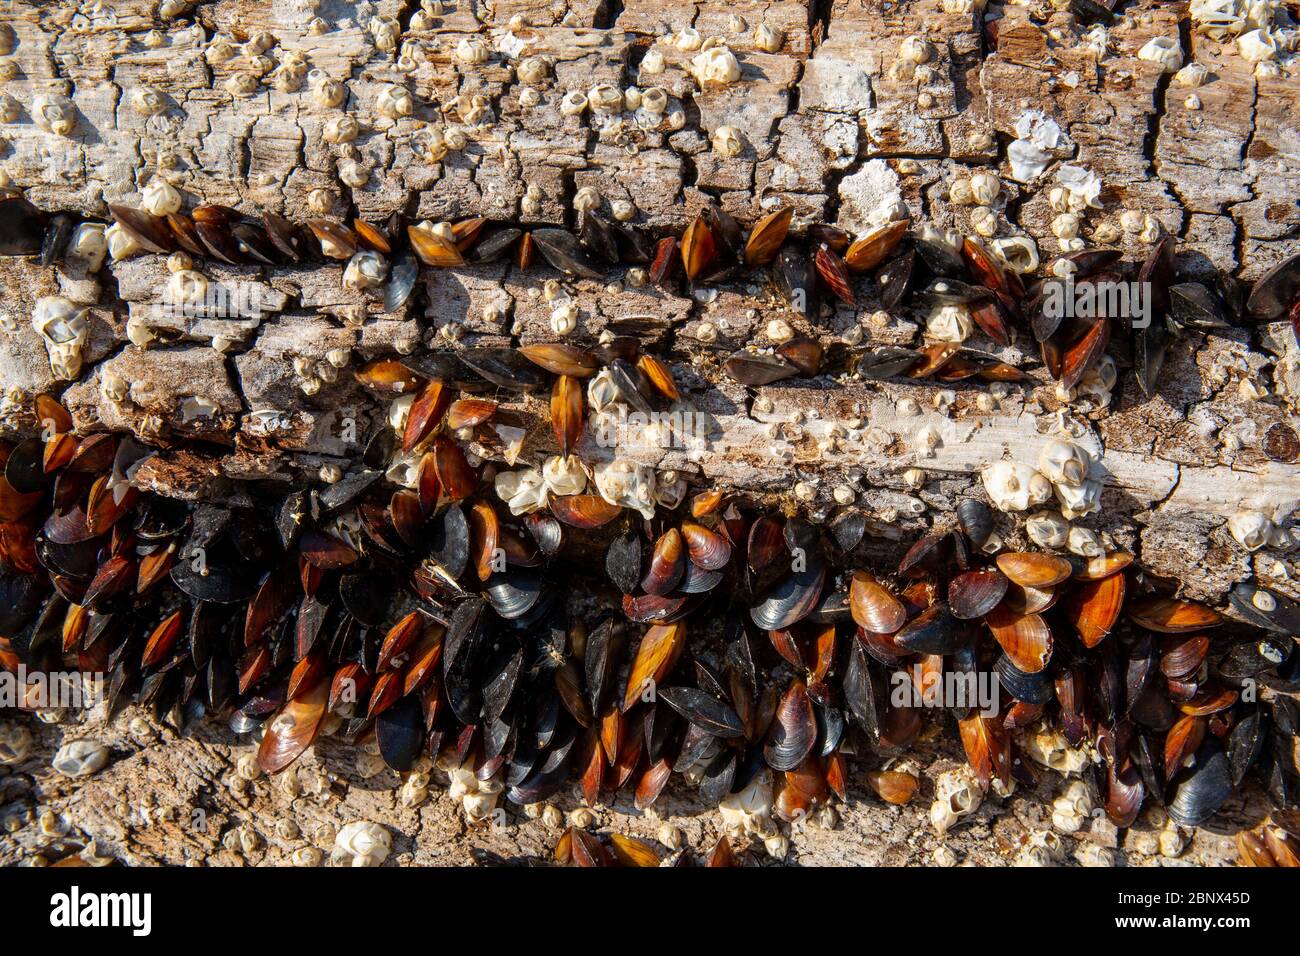 Mussels on the rocks by the sea. Stock Photo